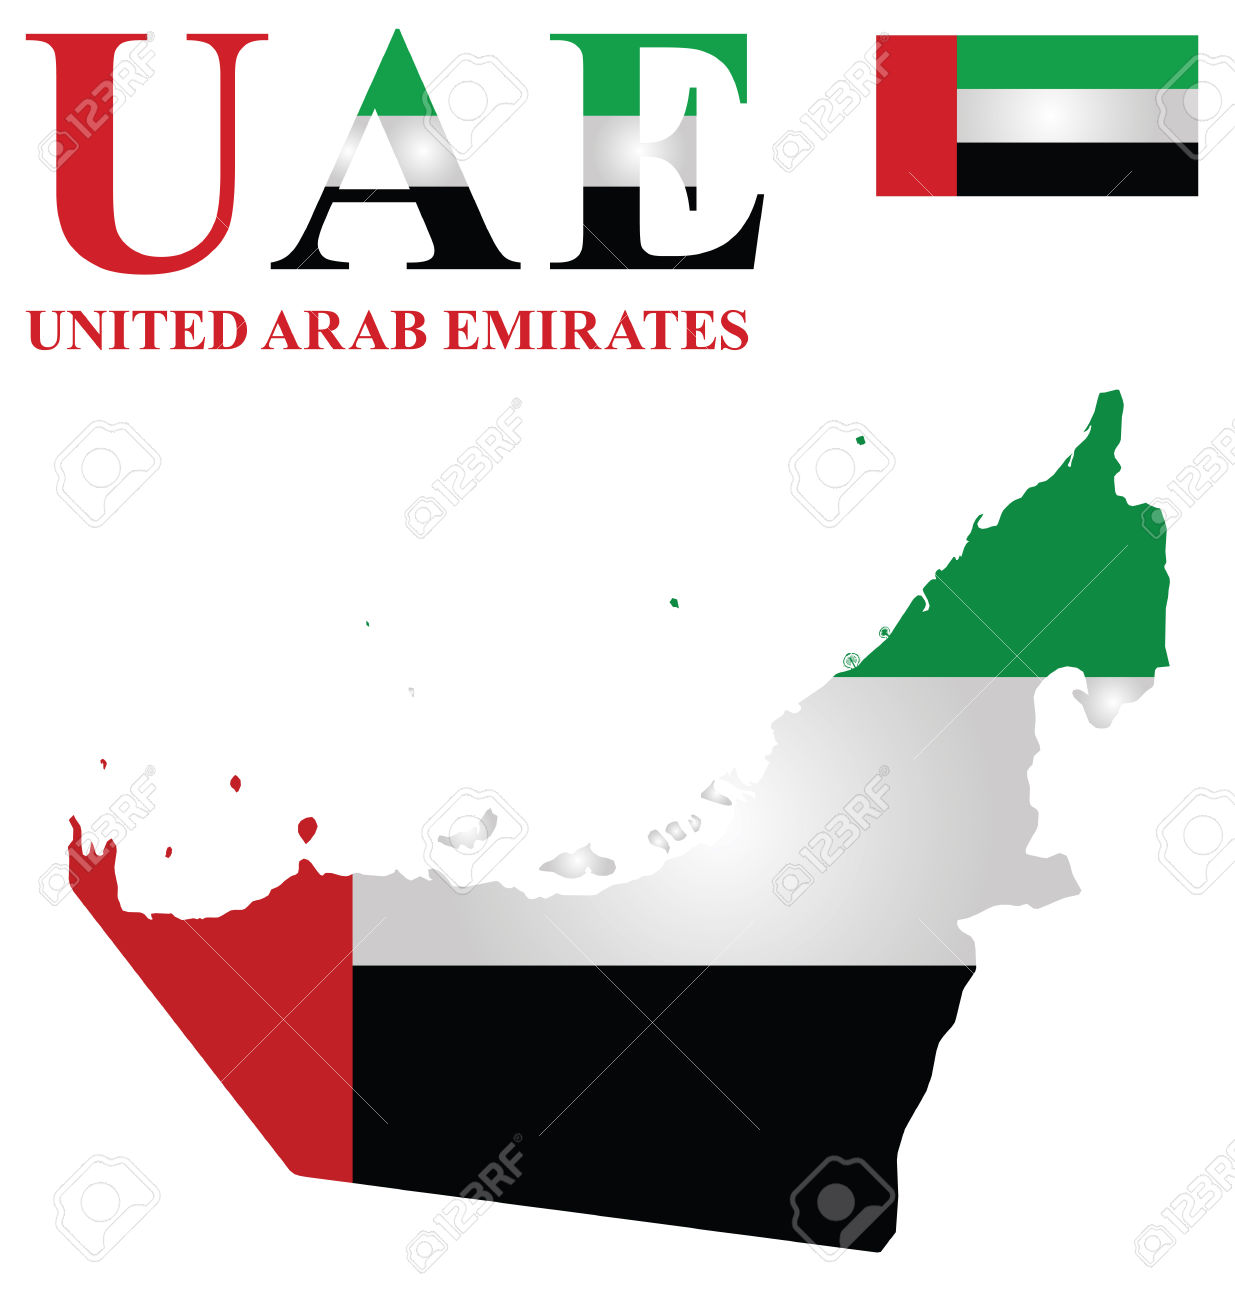 United Arab Emirates clipart #6, Download drawings